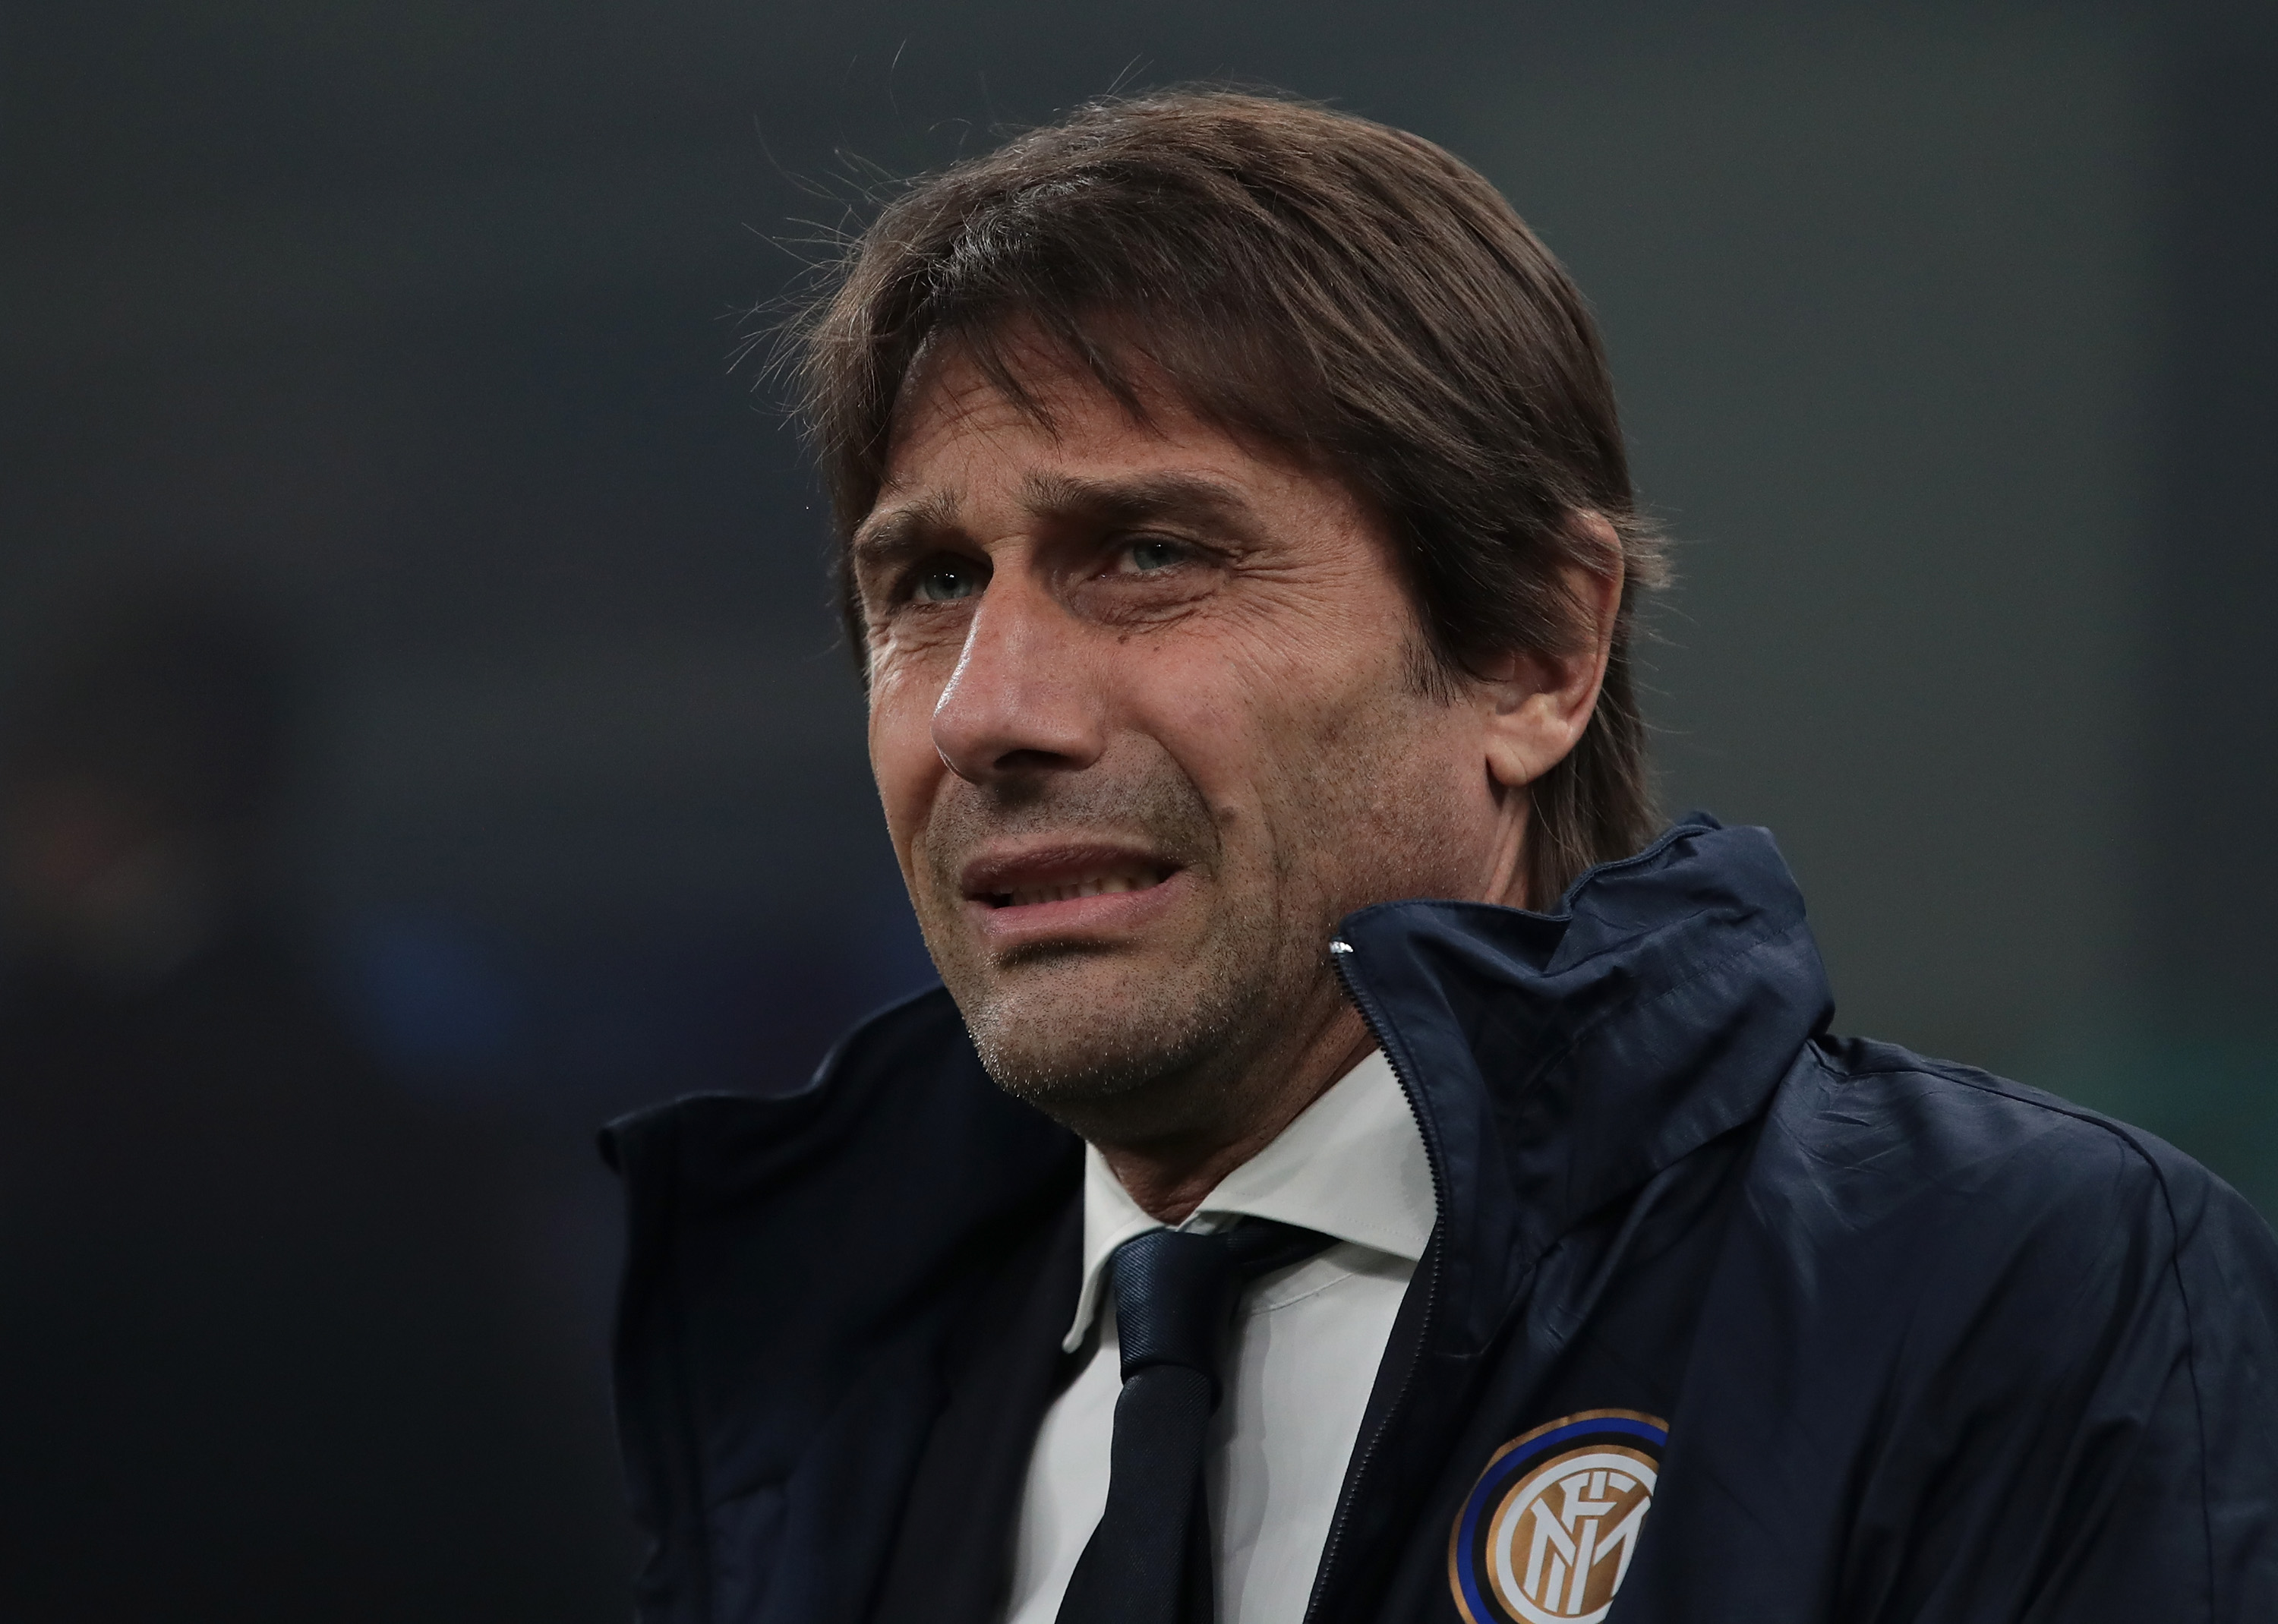 Will Antonio Conte return to Inter Milan? (Photo by Emilio Andreoli/Getty Images)